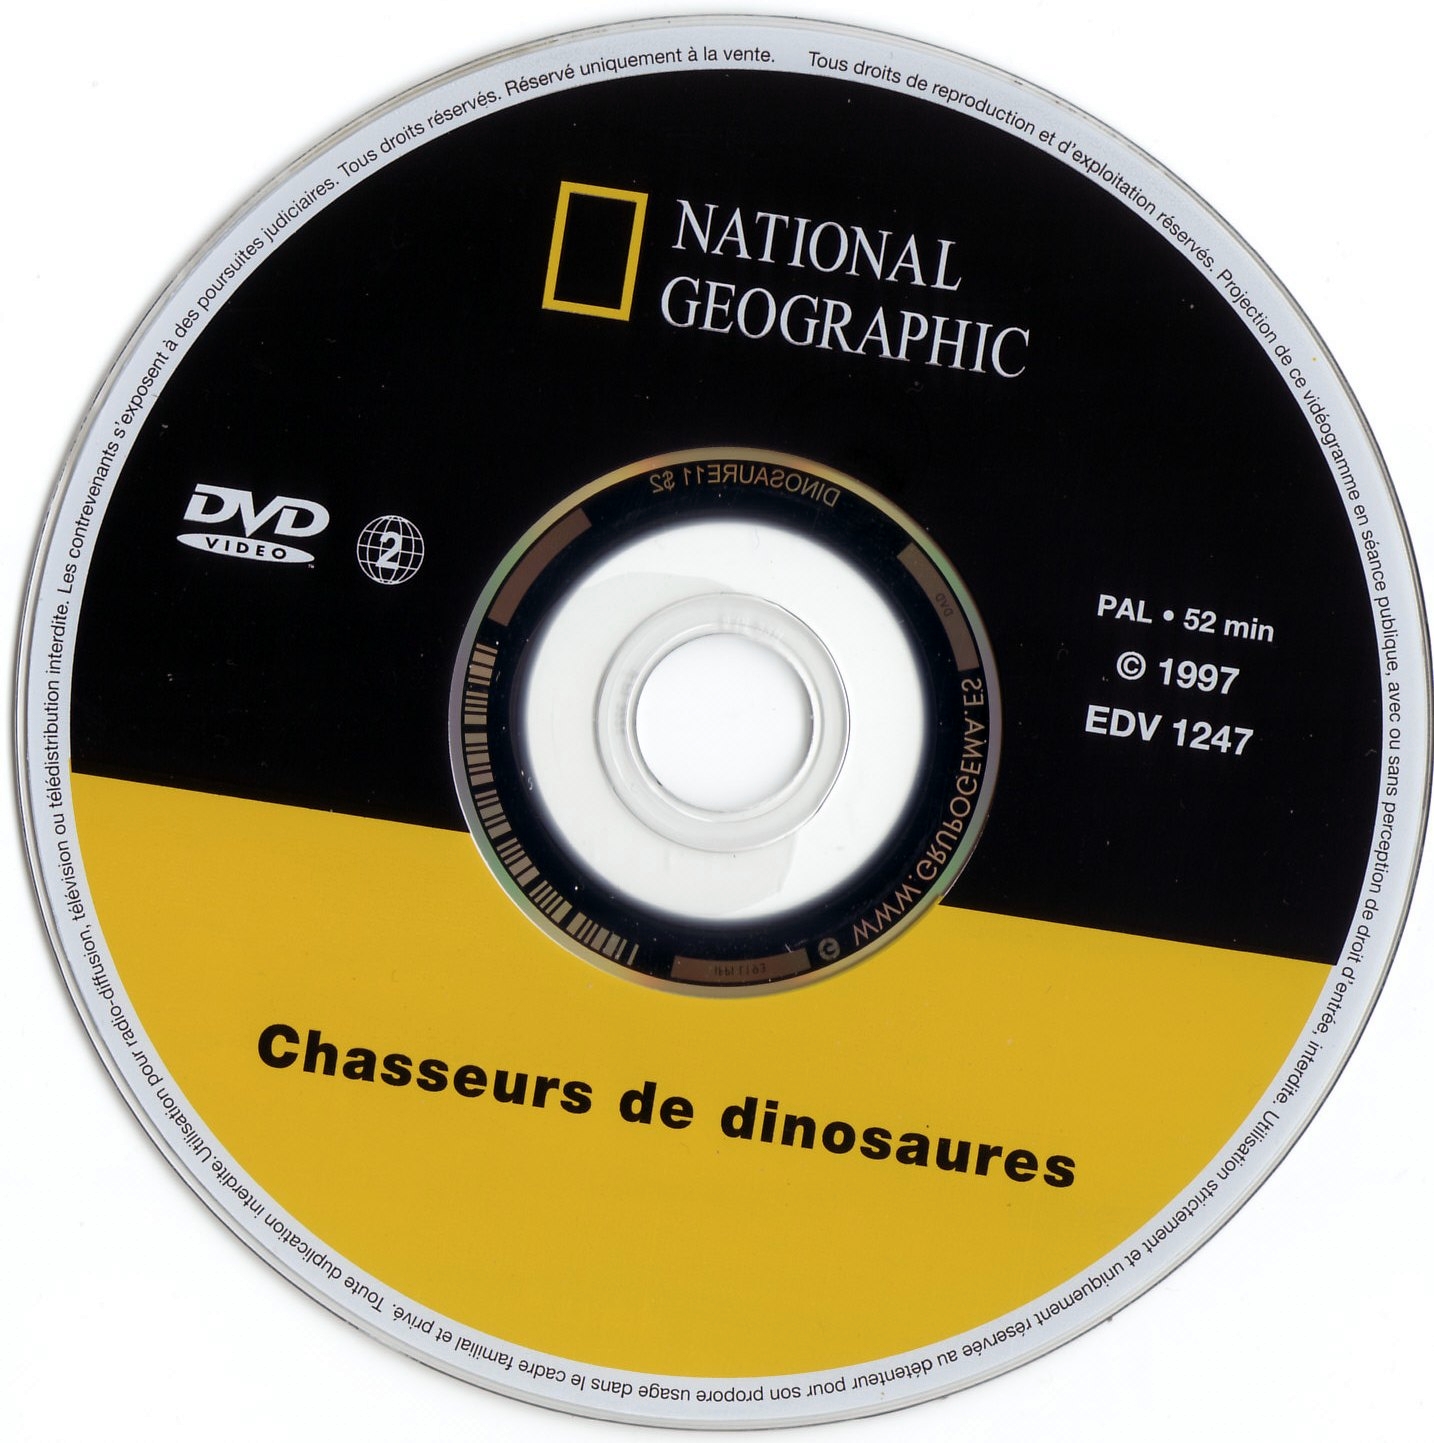 National geographic - chasseurs de dinosaures